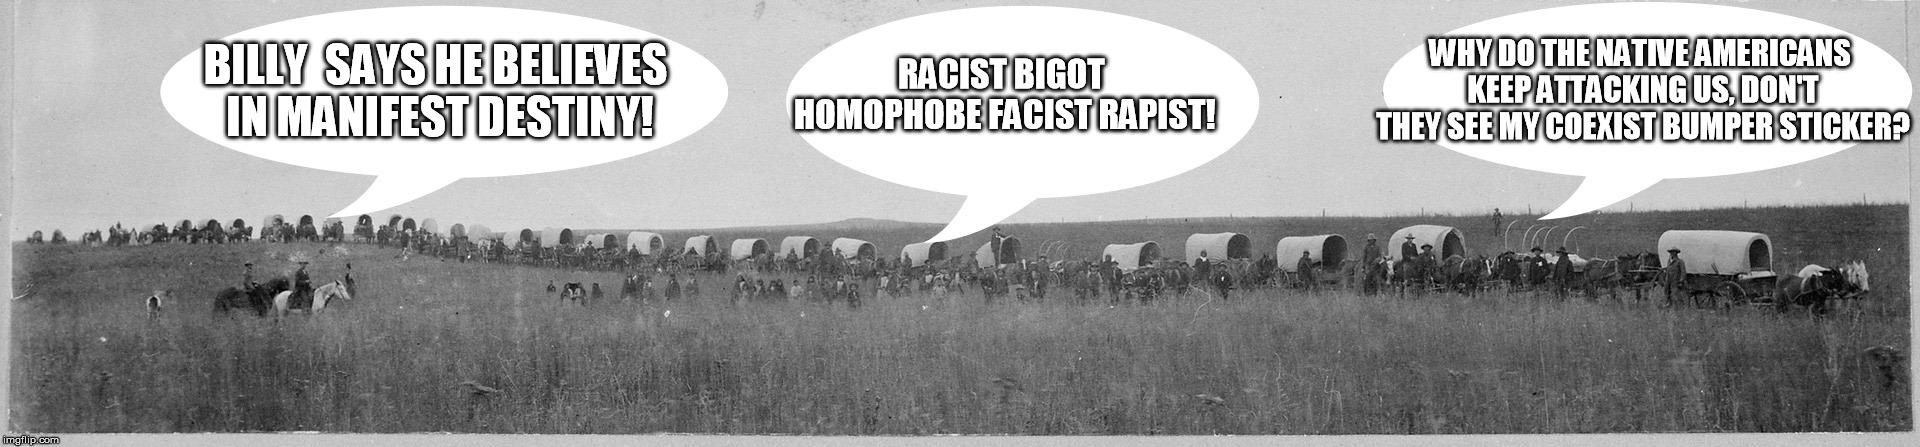 Snowflake Wagon Train- If Social Justice Warriors Tamed the Wild West | WHY DO THE NATIVE AMERICANS KEEP ATTACKING US, DON'T THEY SEE MY COEXIST BUMPER STICKER? BILLY  SAYS HE BELIEVES IN MANIFEST DESTINY! RACIST BIGOT HOMOPHOBE FACIST RAPIST! | image tagged in snowflake wagon train,special snowflake | made w/ Imgflip meme maker